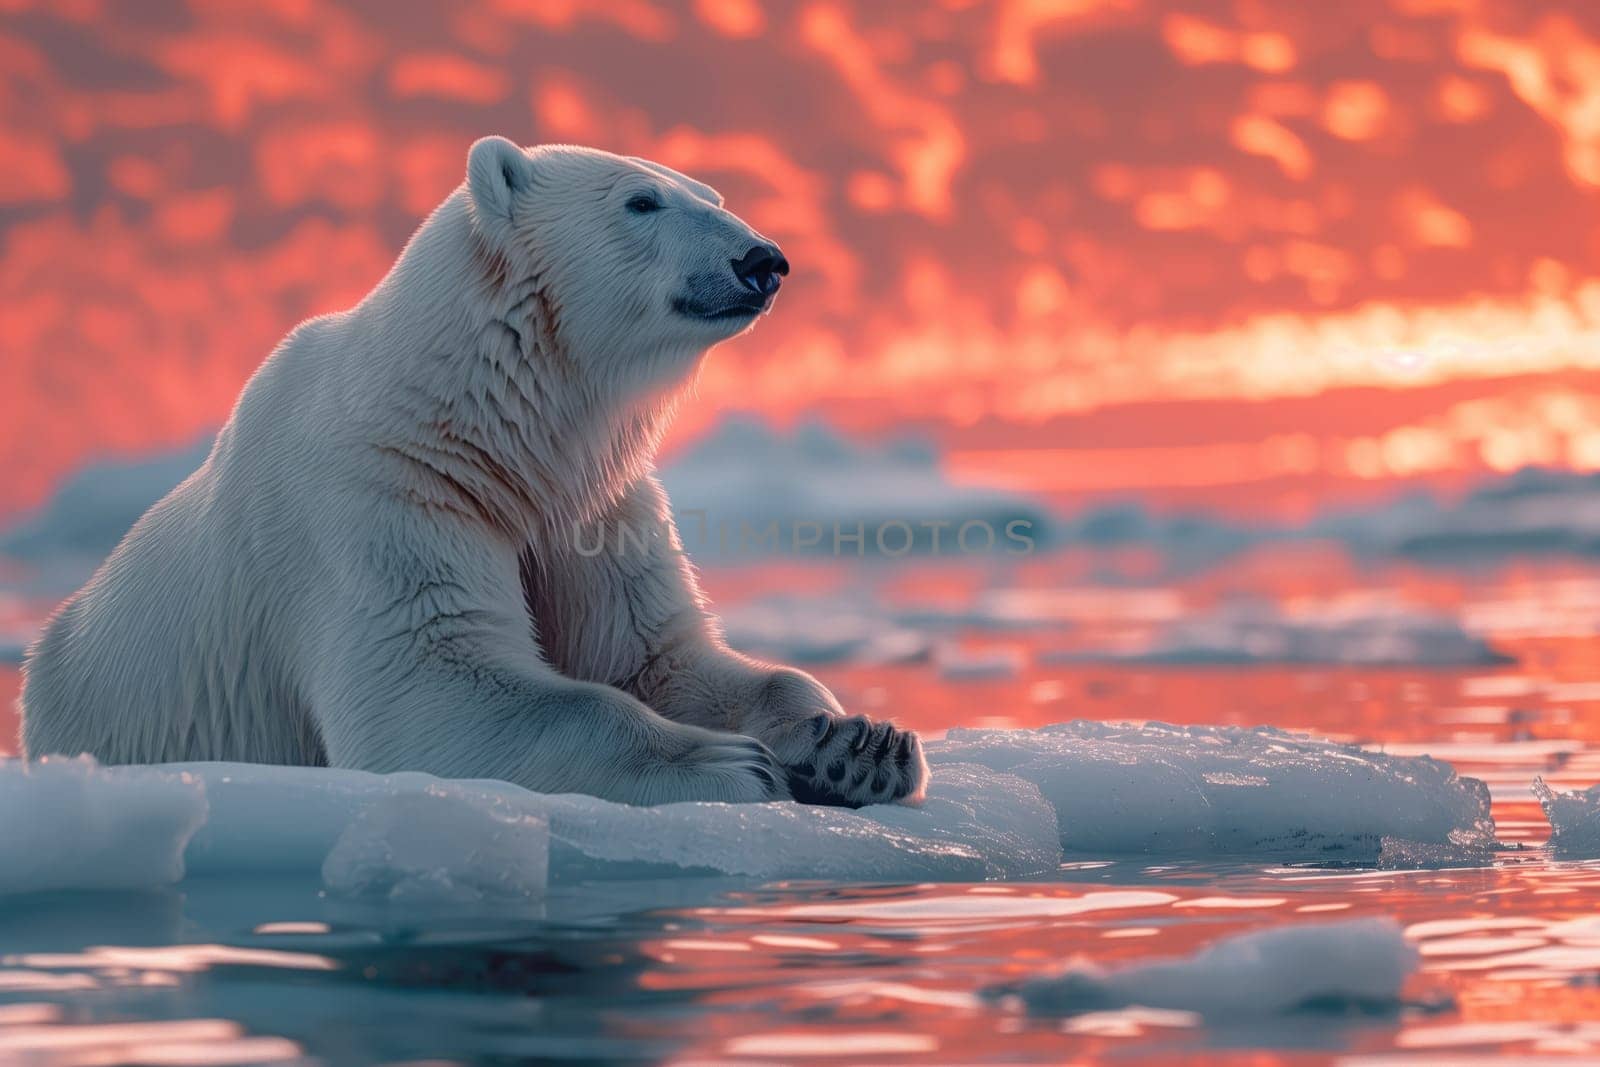 Polar bear lounges on ice in Arctic water, a majestic sight in natural landscape by richwolf